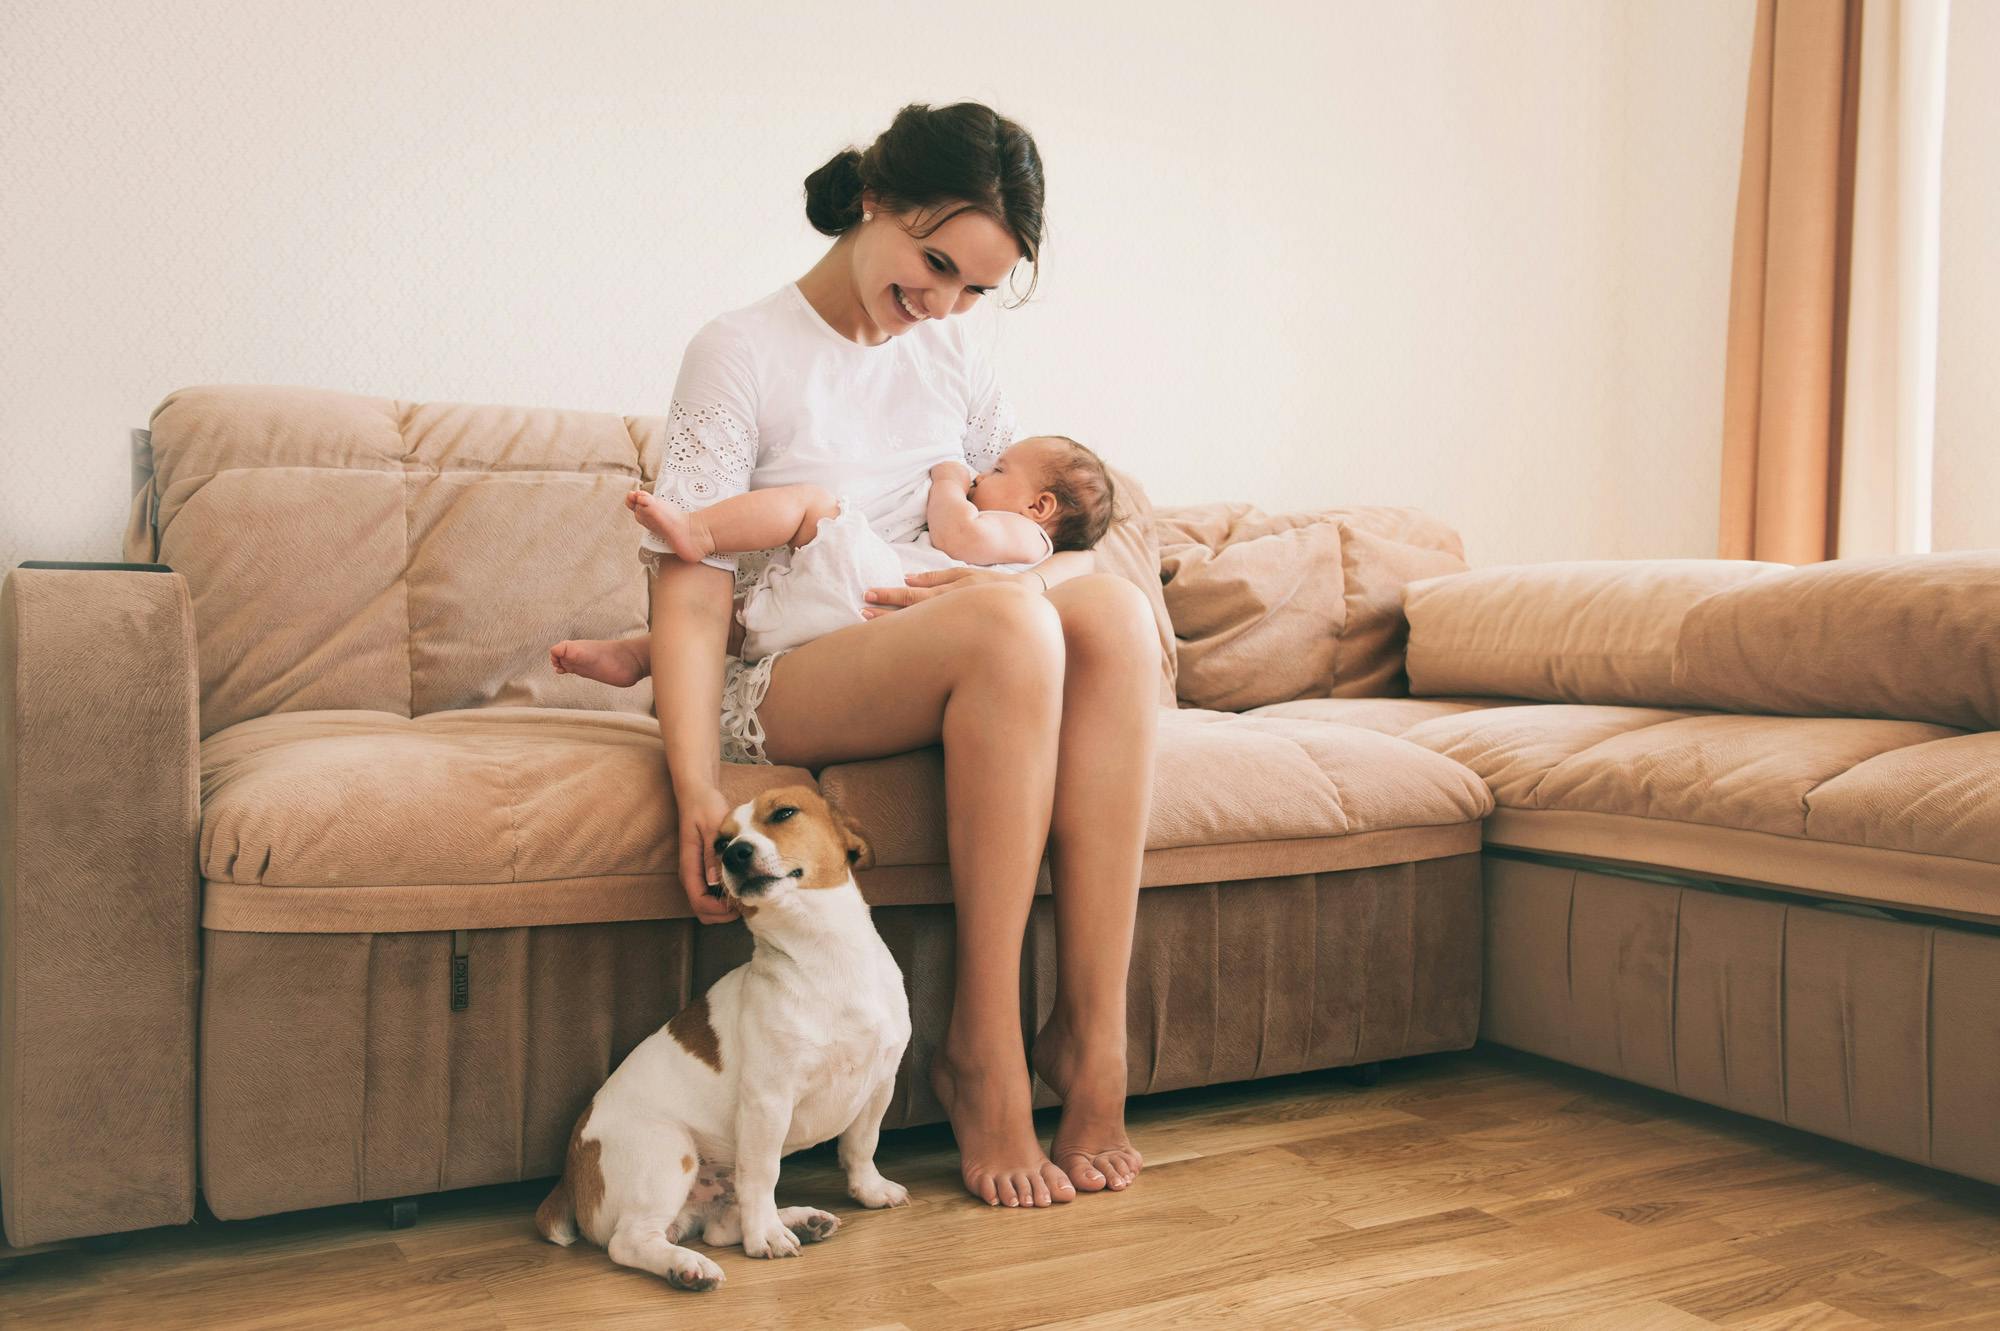 woman holding baby in her lap petting dog that is sitting at safe distance on floor